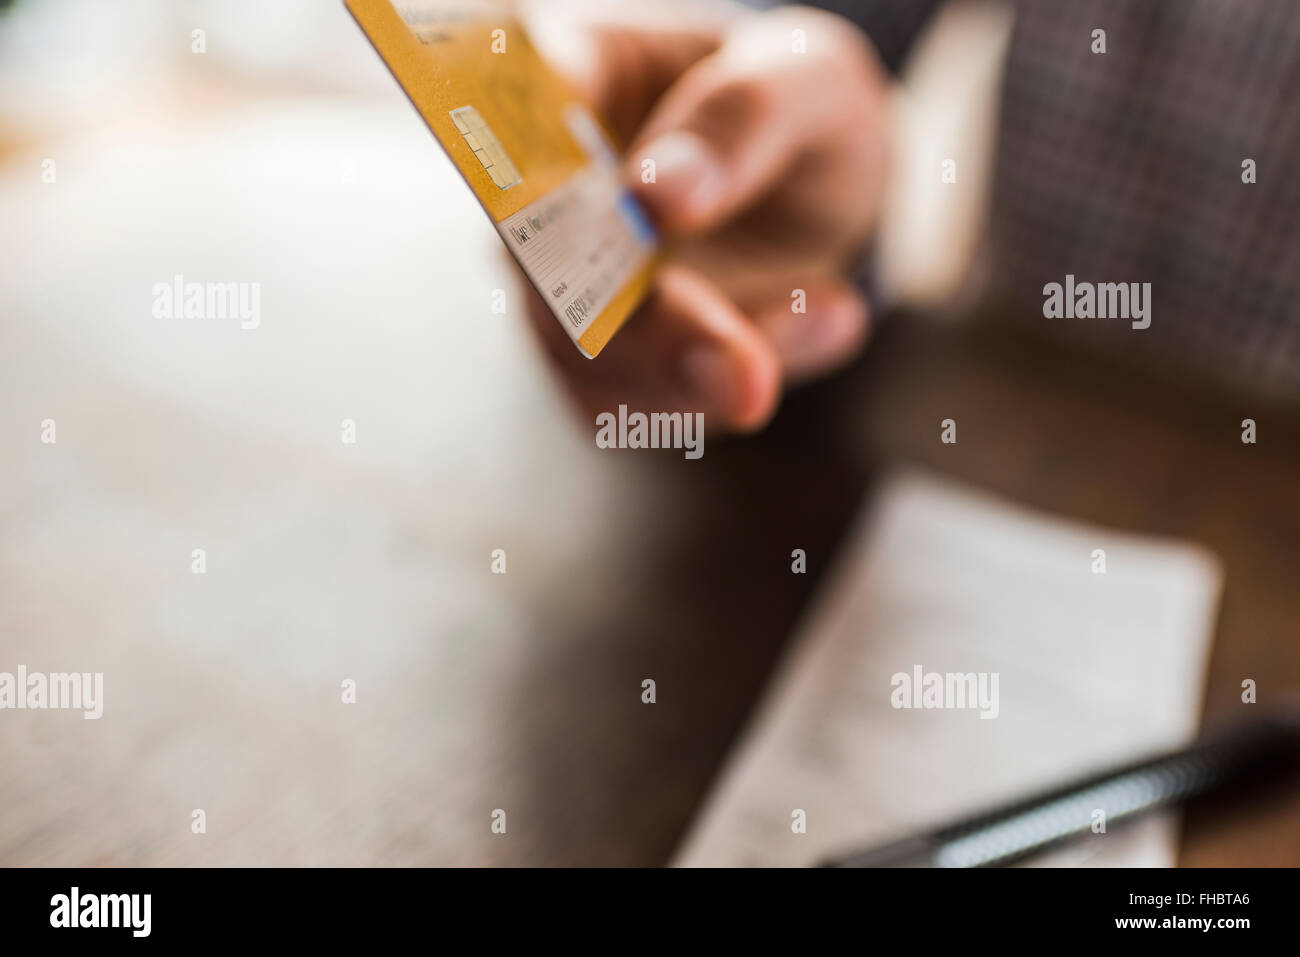 Close-up of hand holding credit card Stock Photo